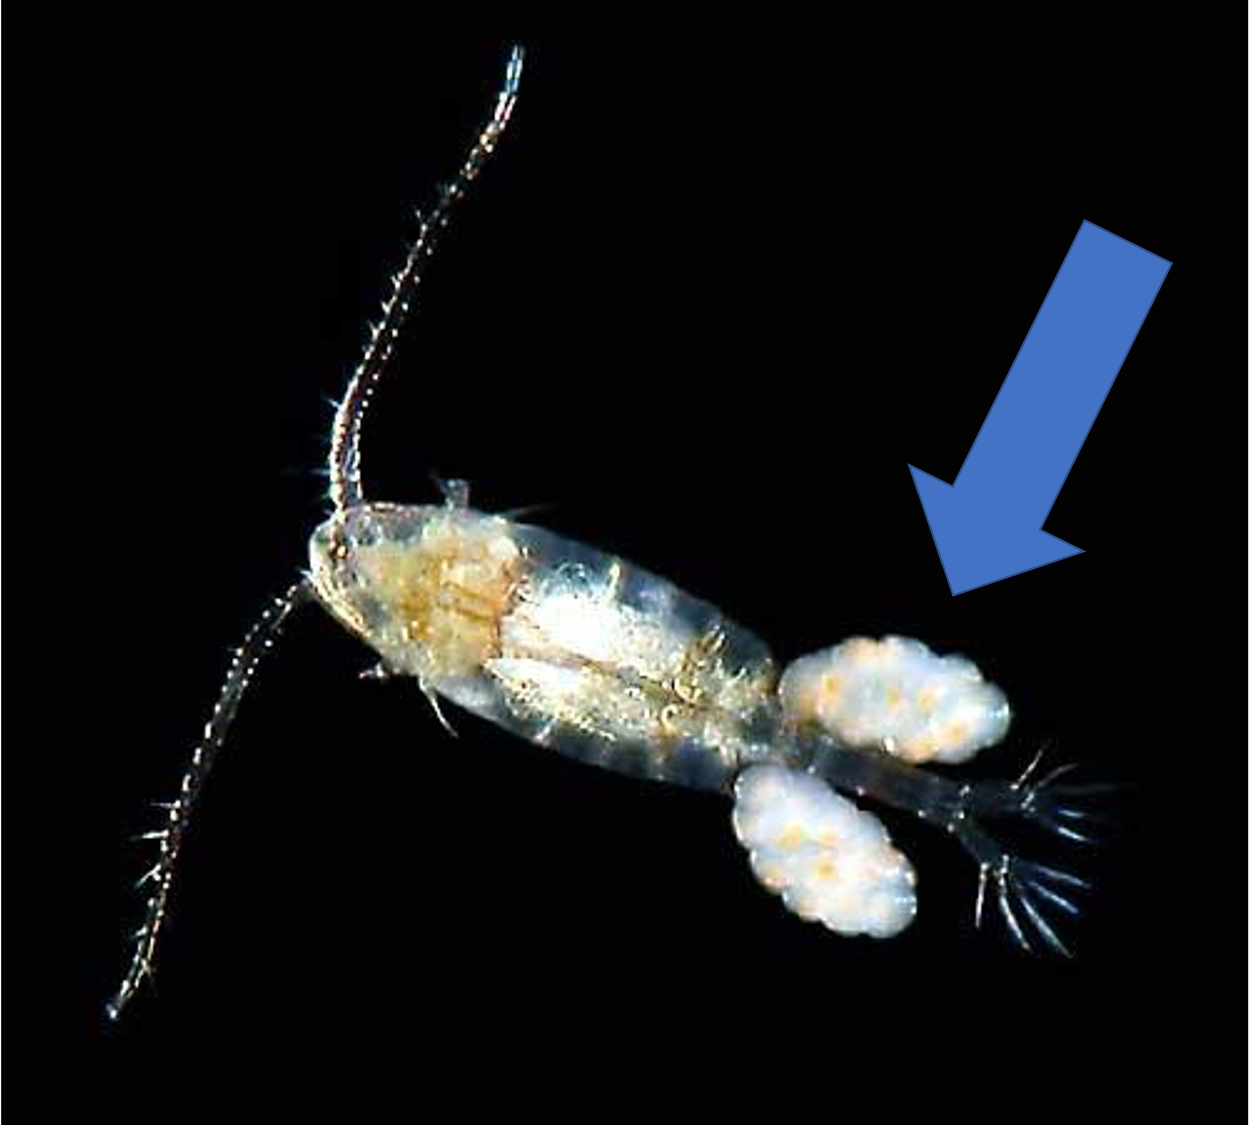 female copepod under a microscope, with an arrow pointing at the egg sac